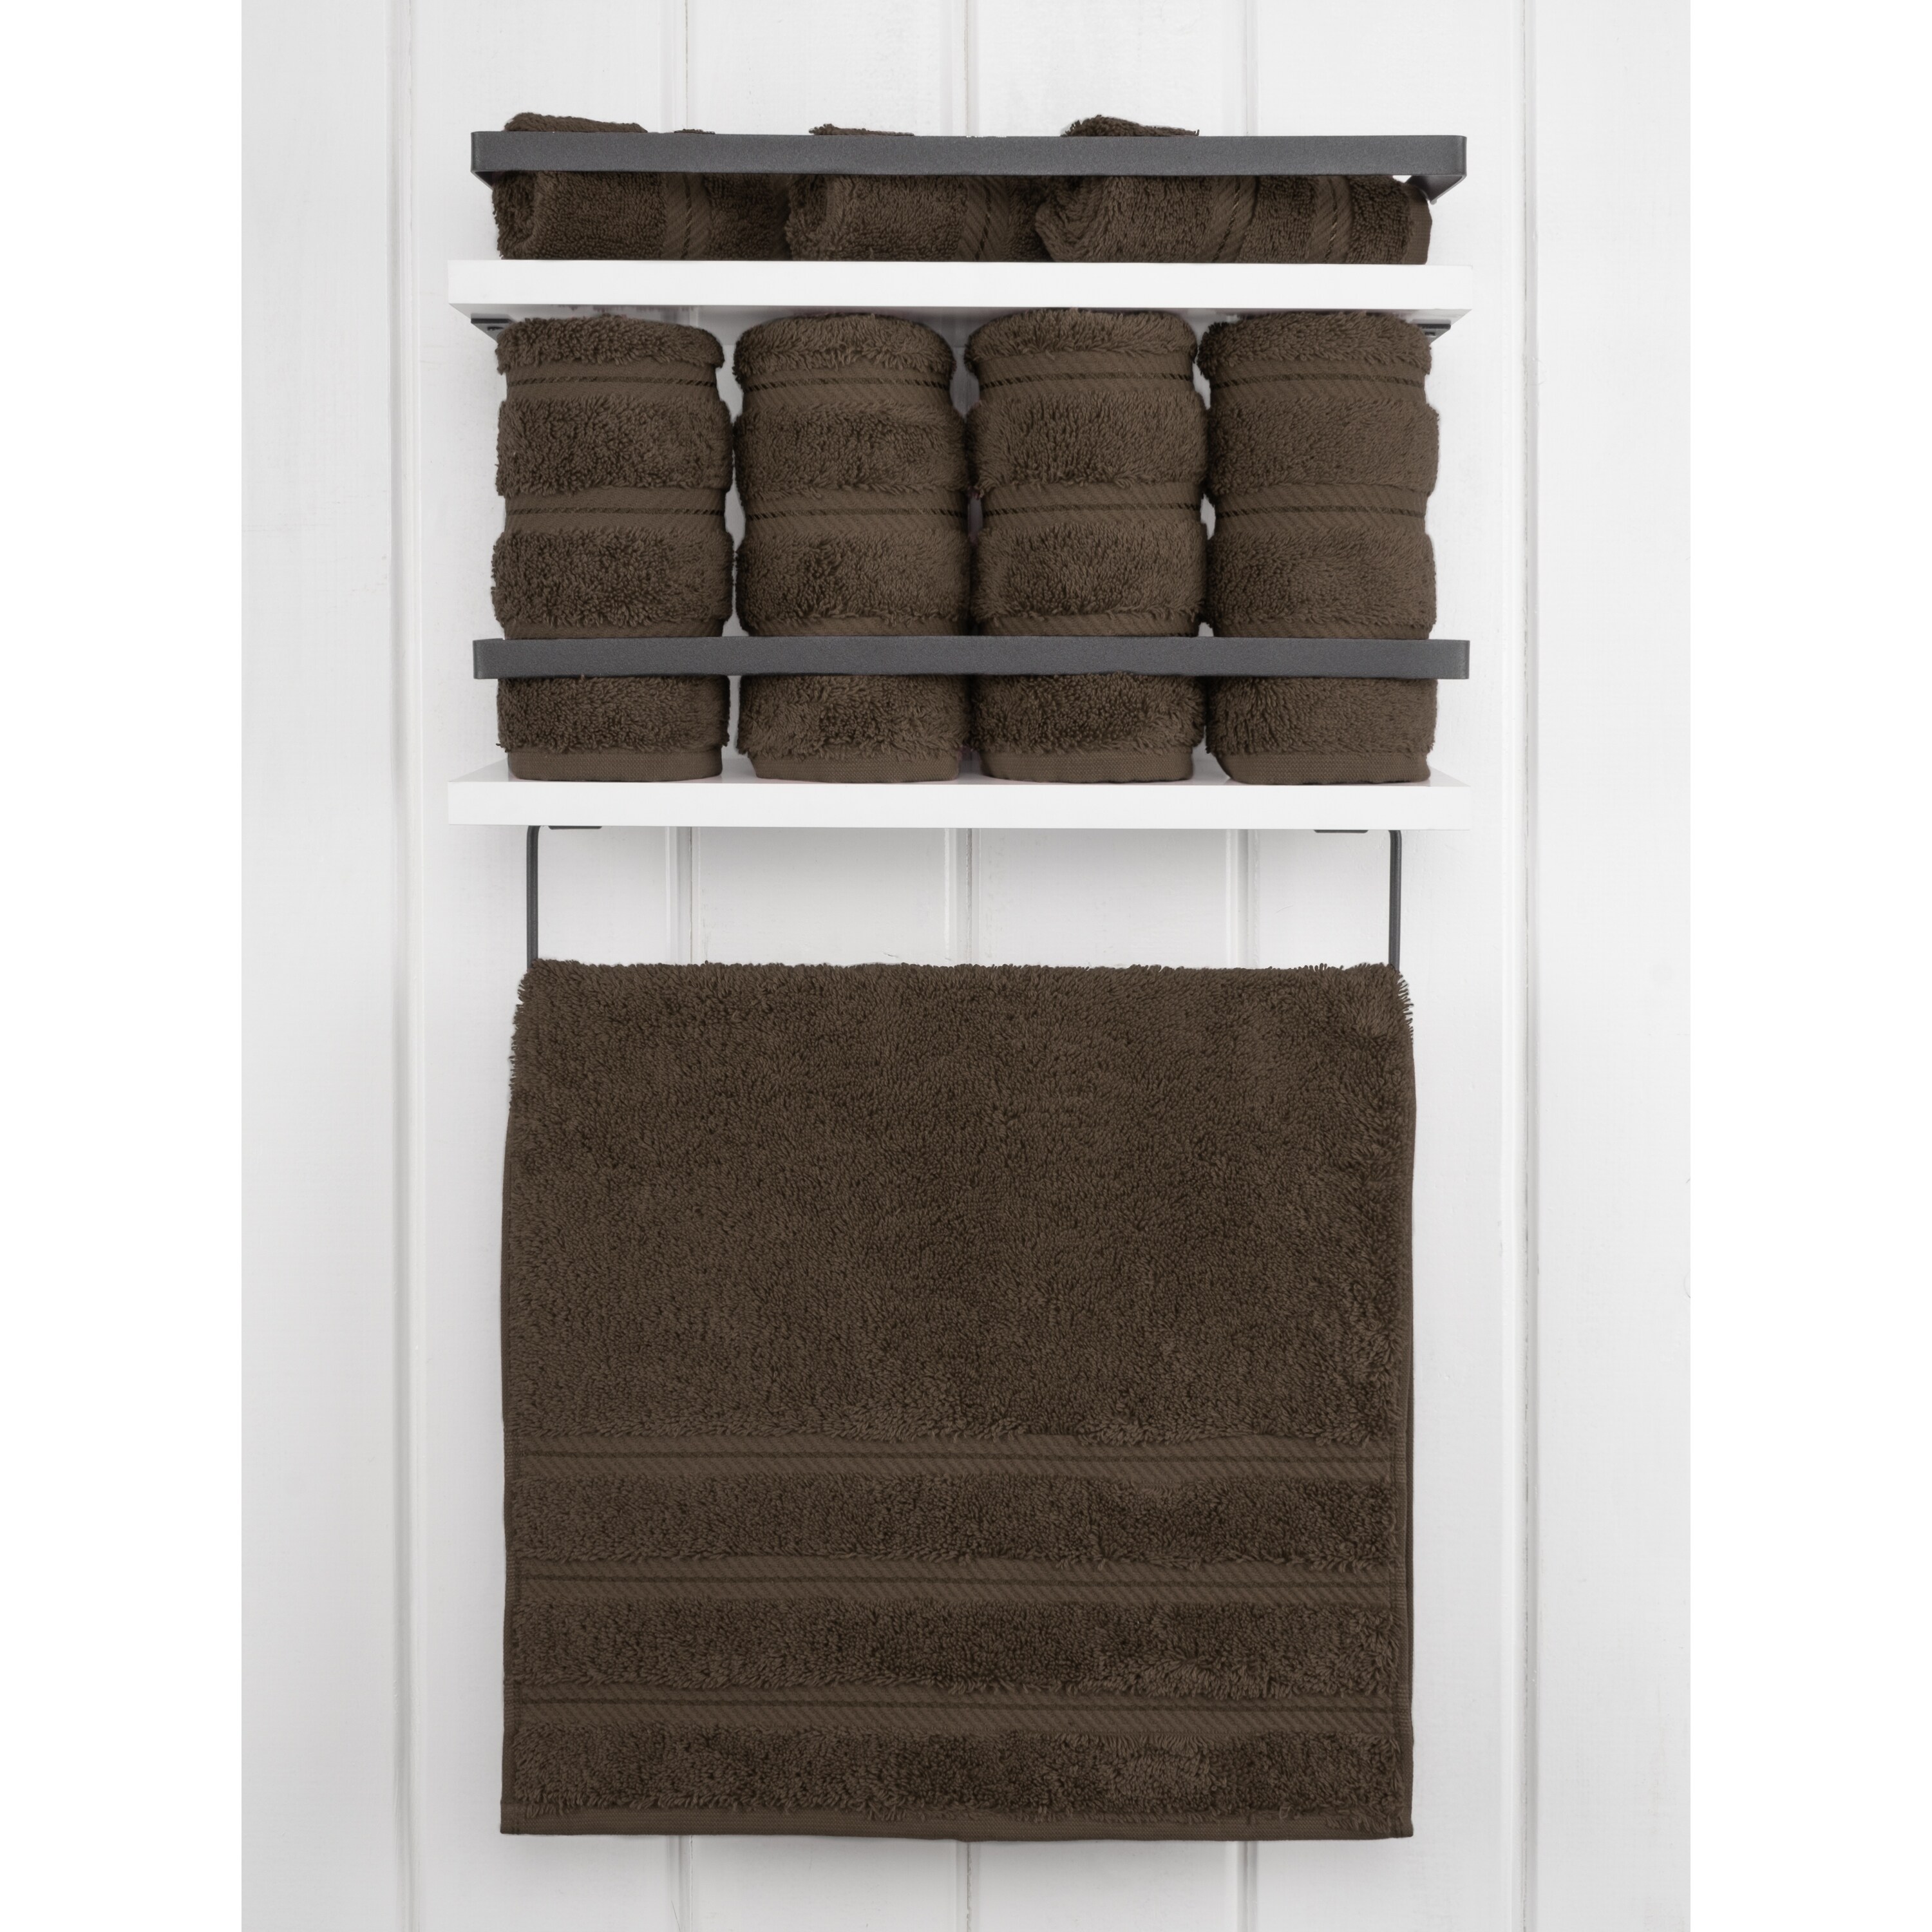 https://ak1.ostkcdn.com/images/products/is/images/direct/d47c11b432277e9c9ee1c3a86914776dee9c6b17/American-Soft-Linen-4-Piece-Turkish-Hand-Towel-Set.jpg